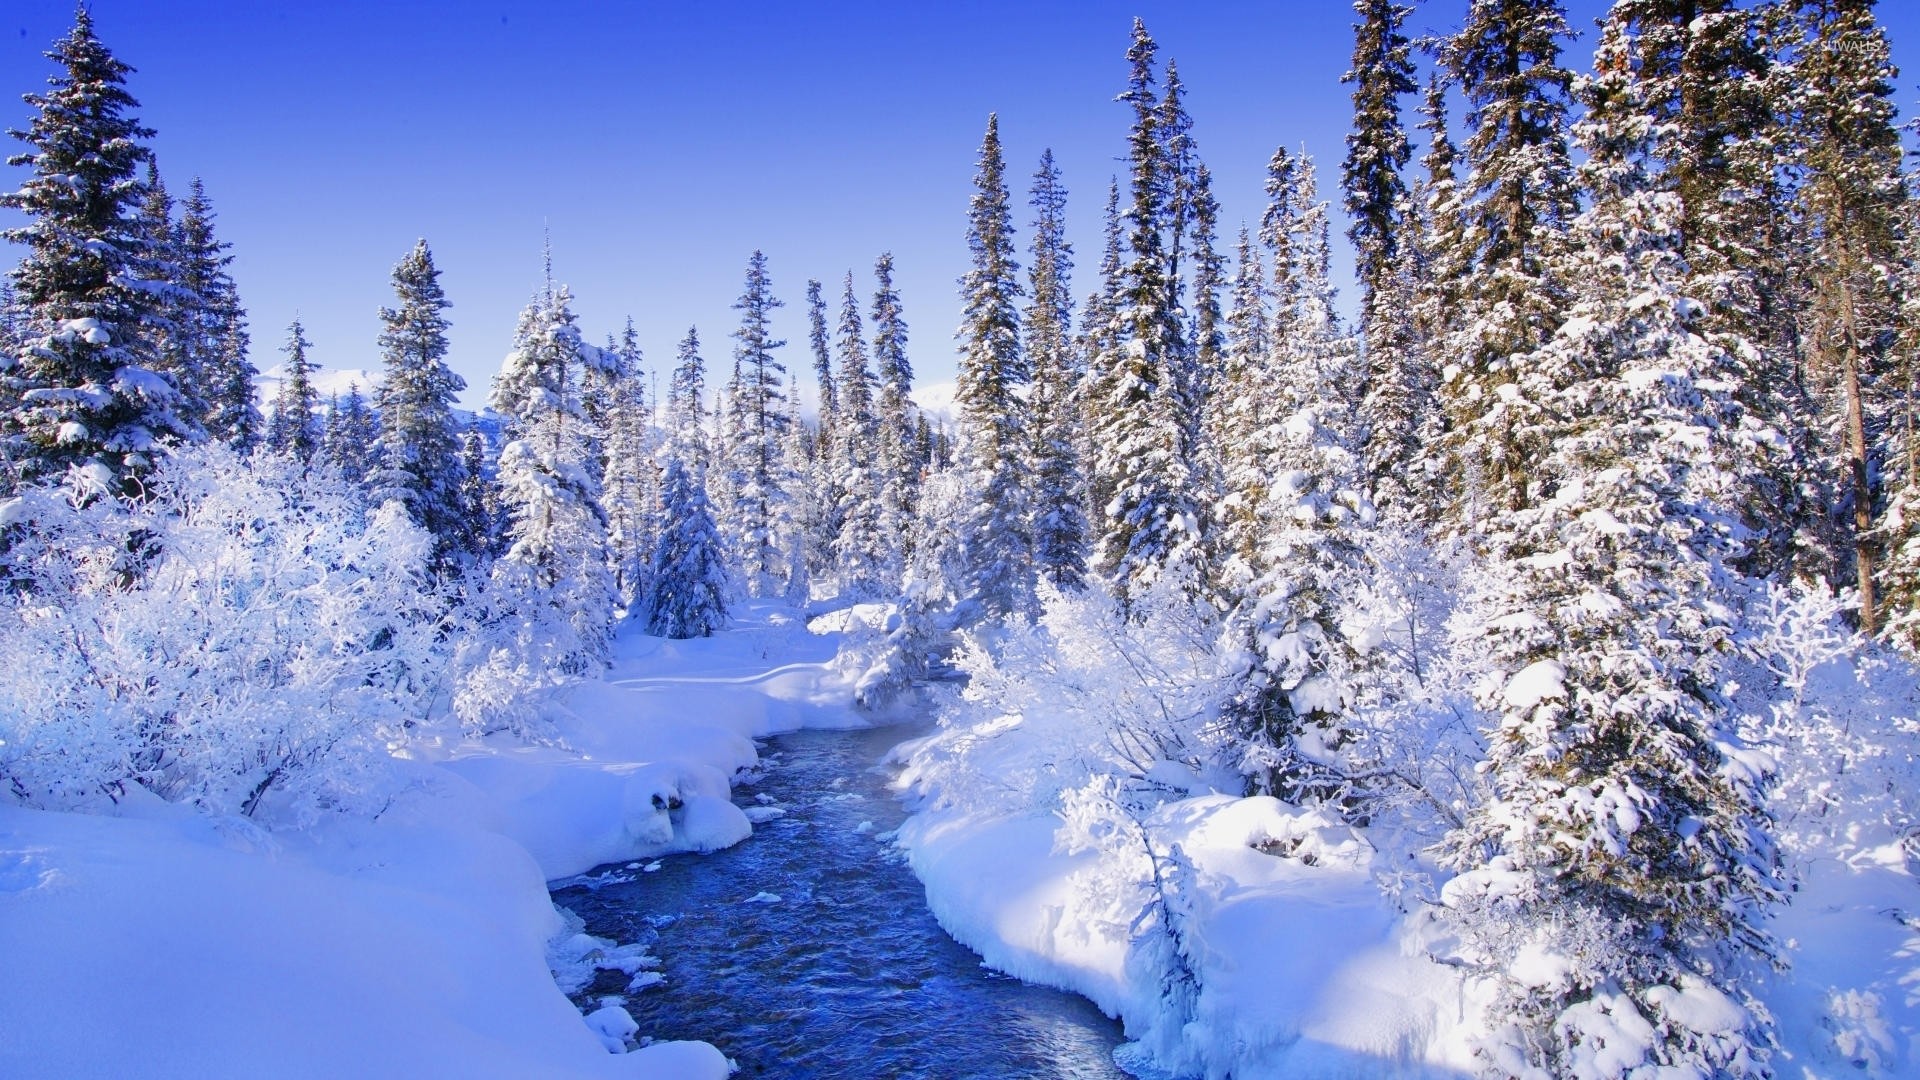 Steamy river by the snowy forest wallpaper – Nature wallpapers .